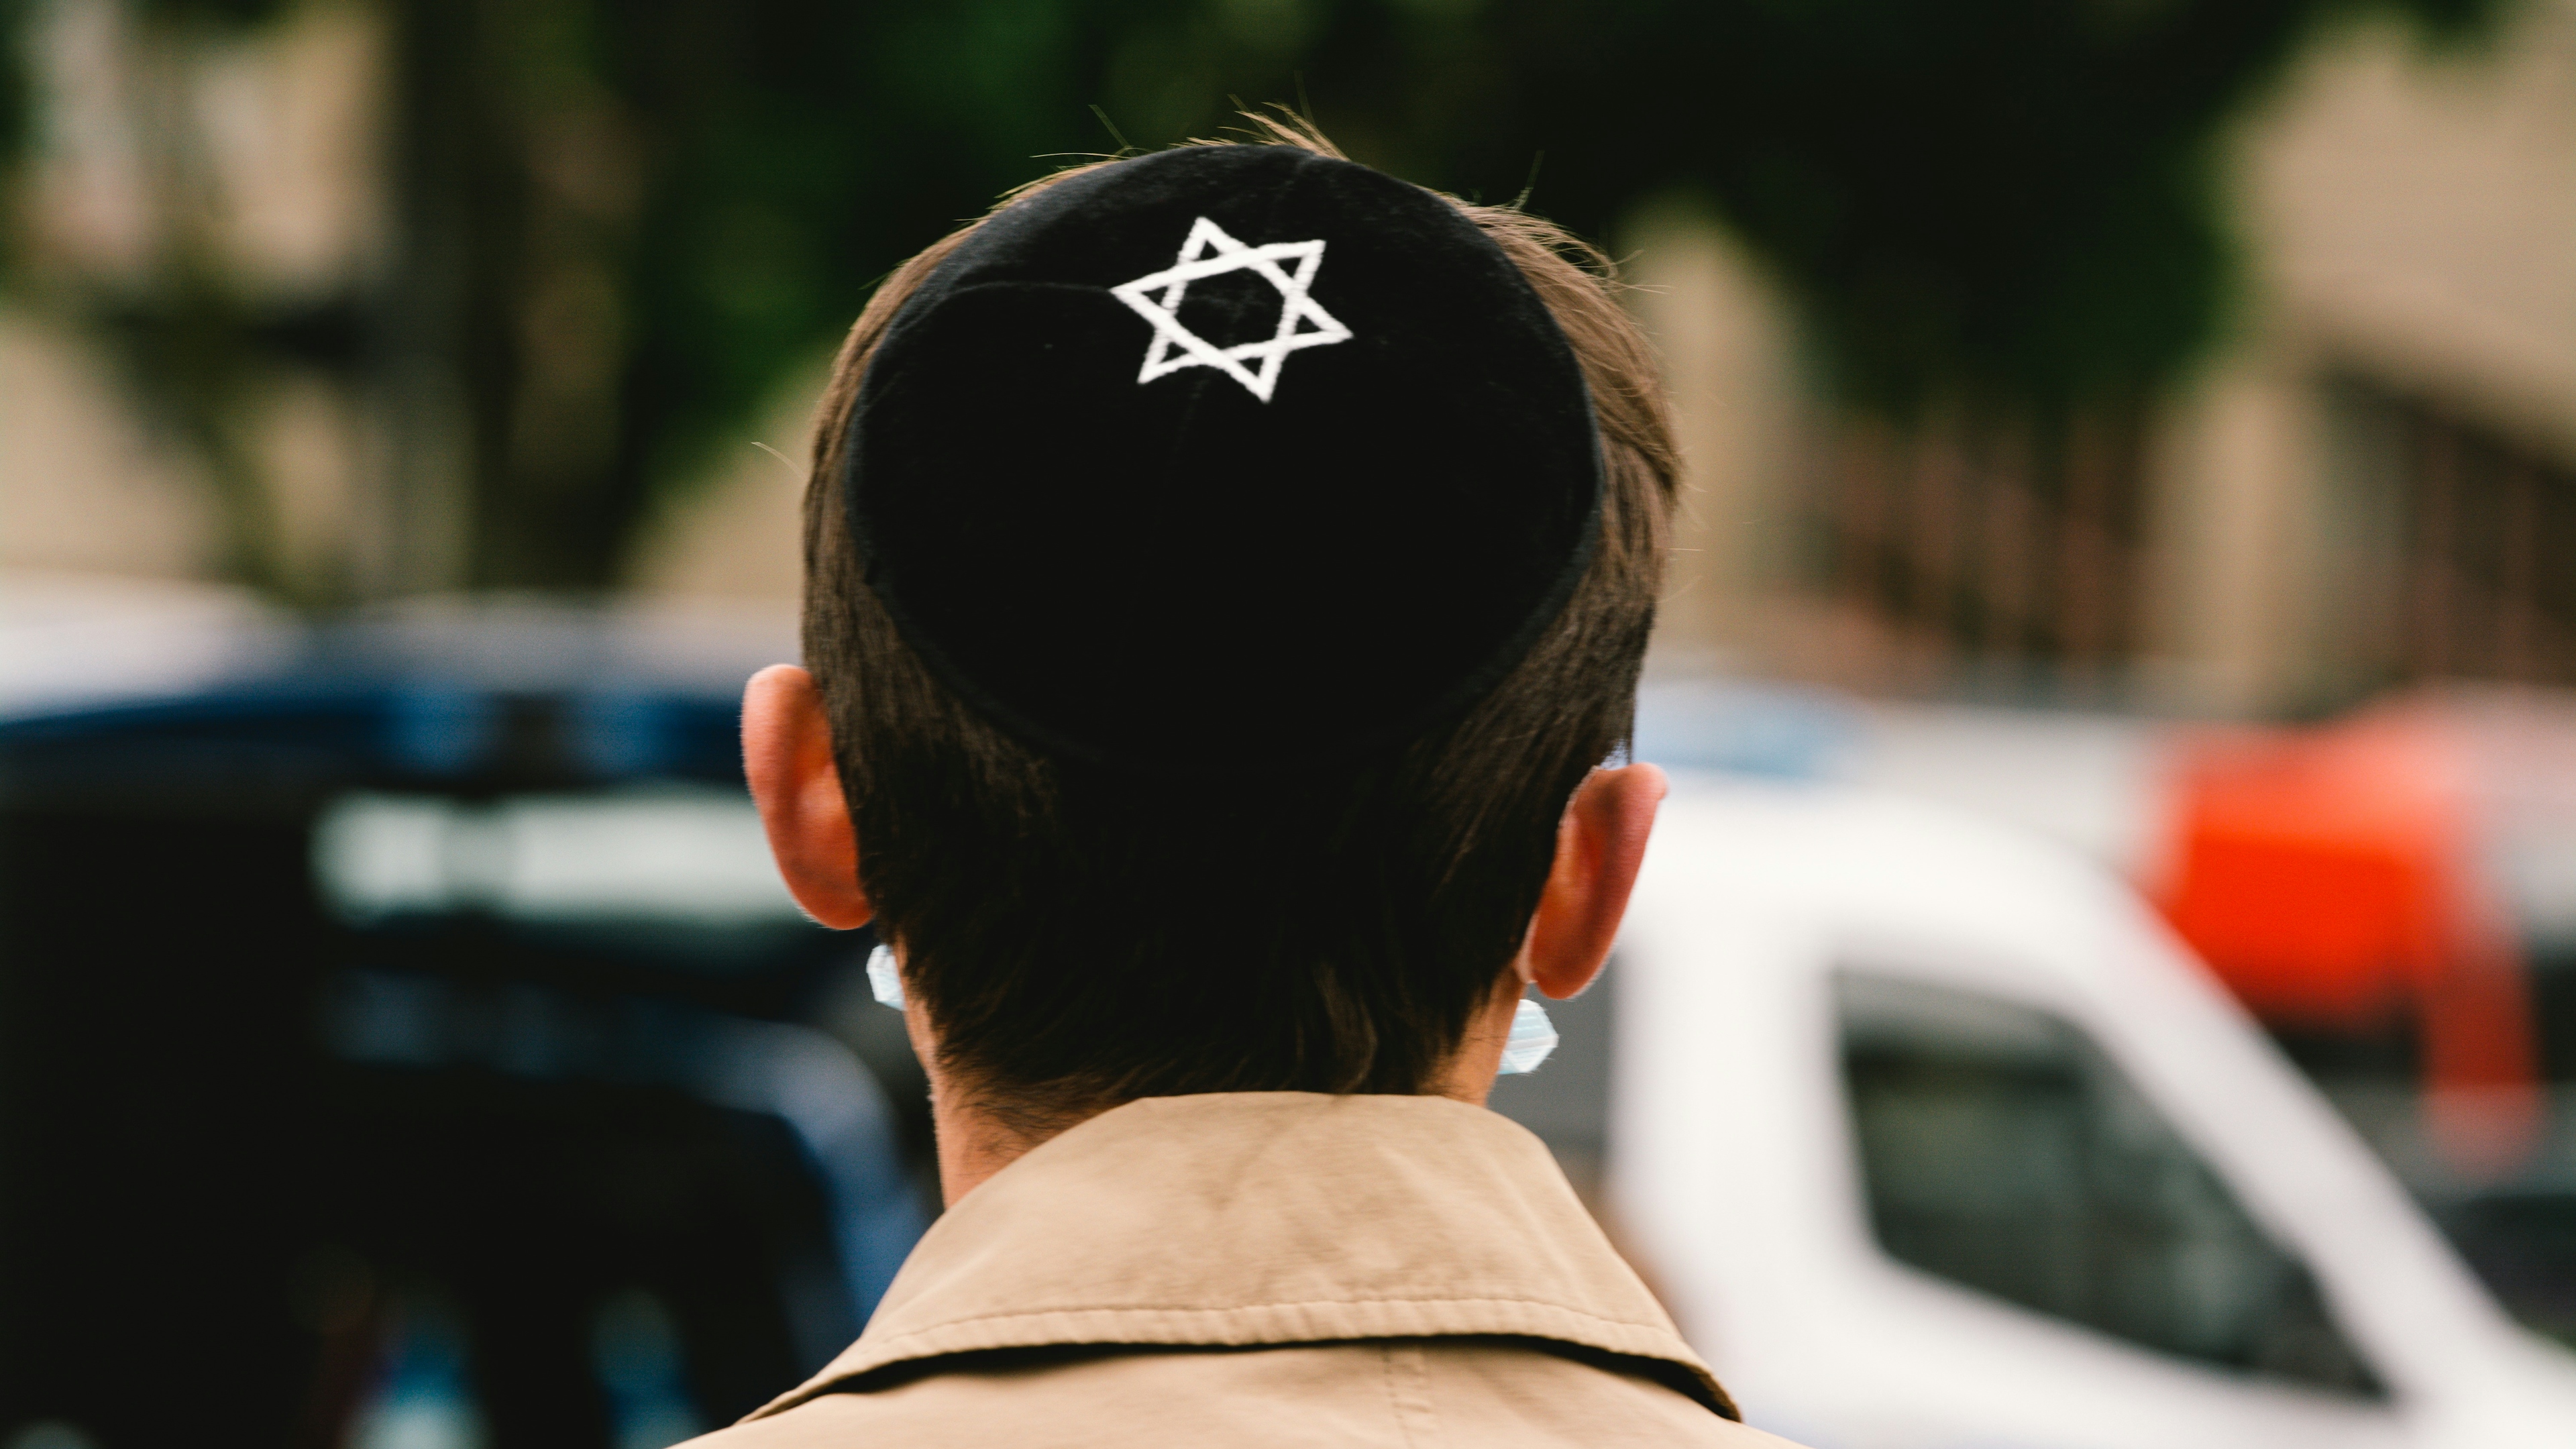 A man wears a kippah during the pro Israel anti Semitism rally in Cologne, Germany on May 20, 2021 